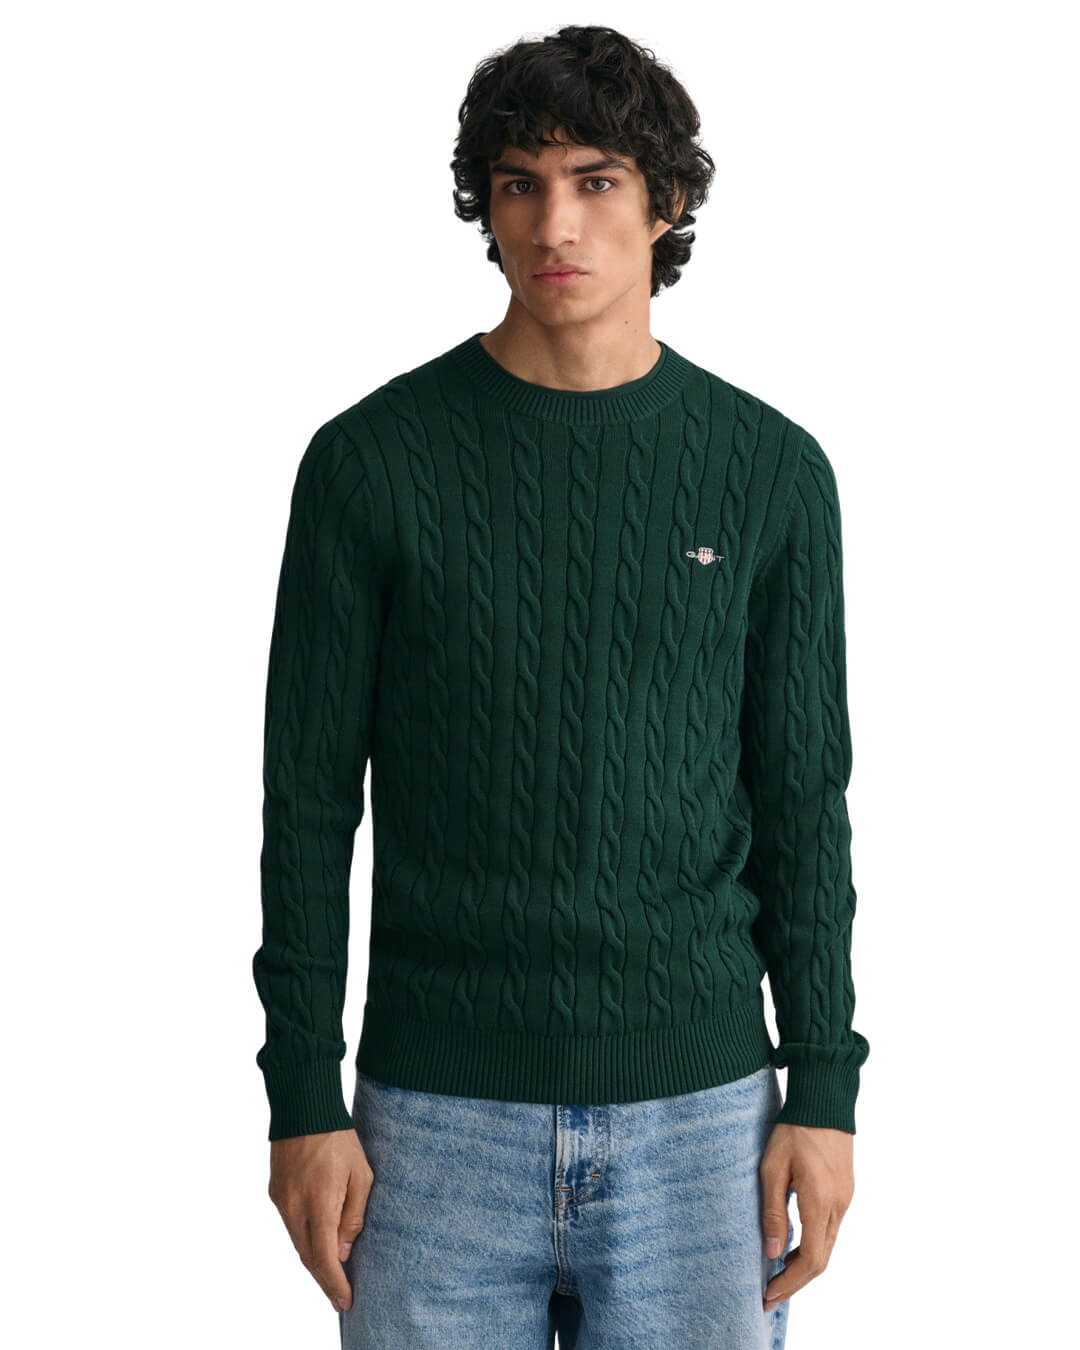 Gant Jumpers Gant Tartan Green Cotton Cable Knit Crew Neck Sweater